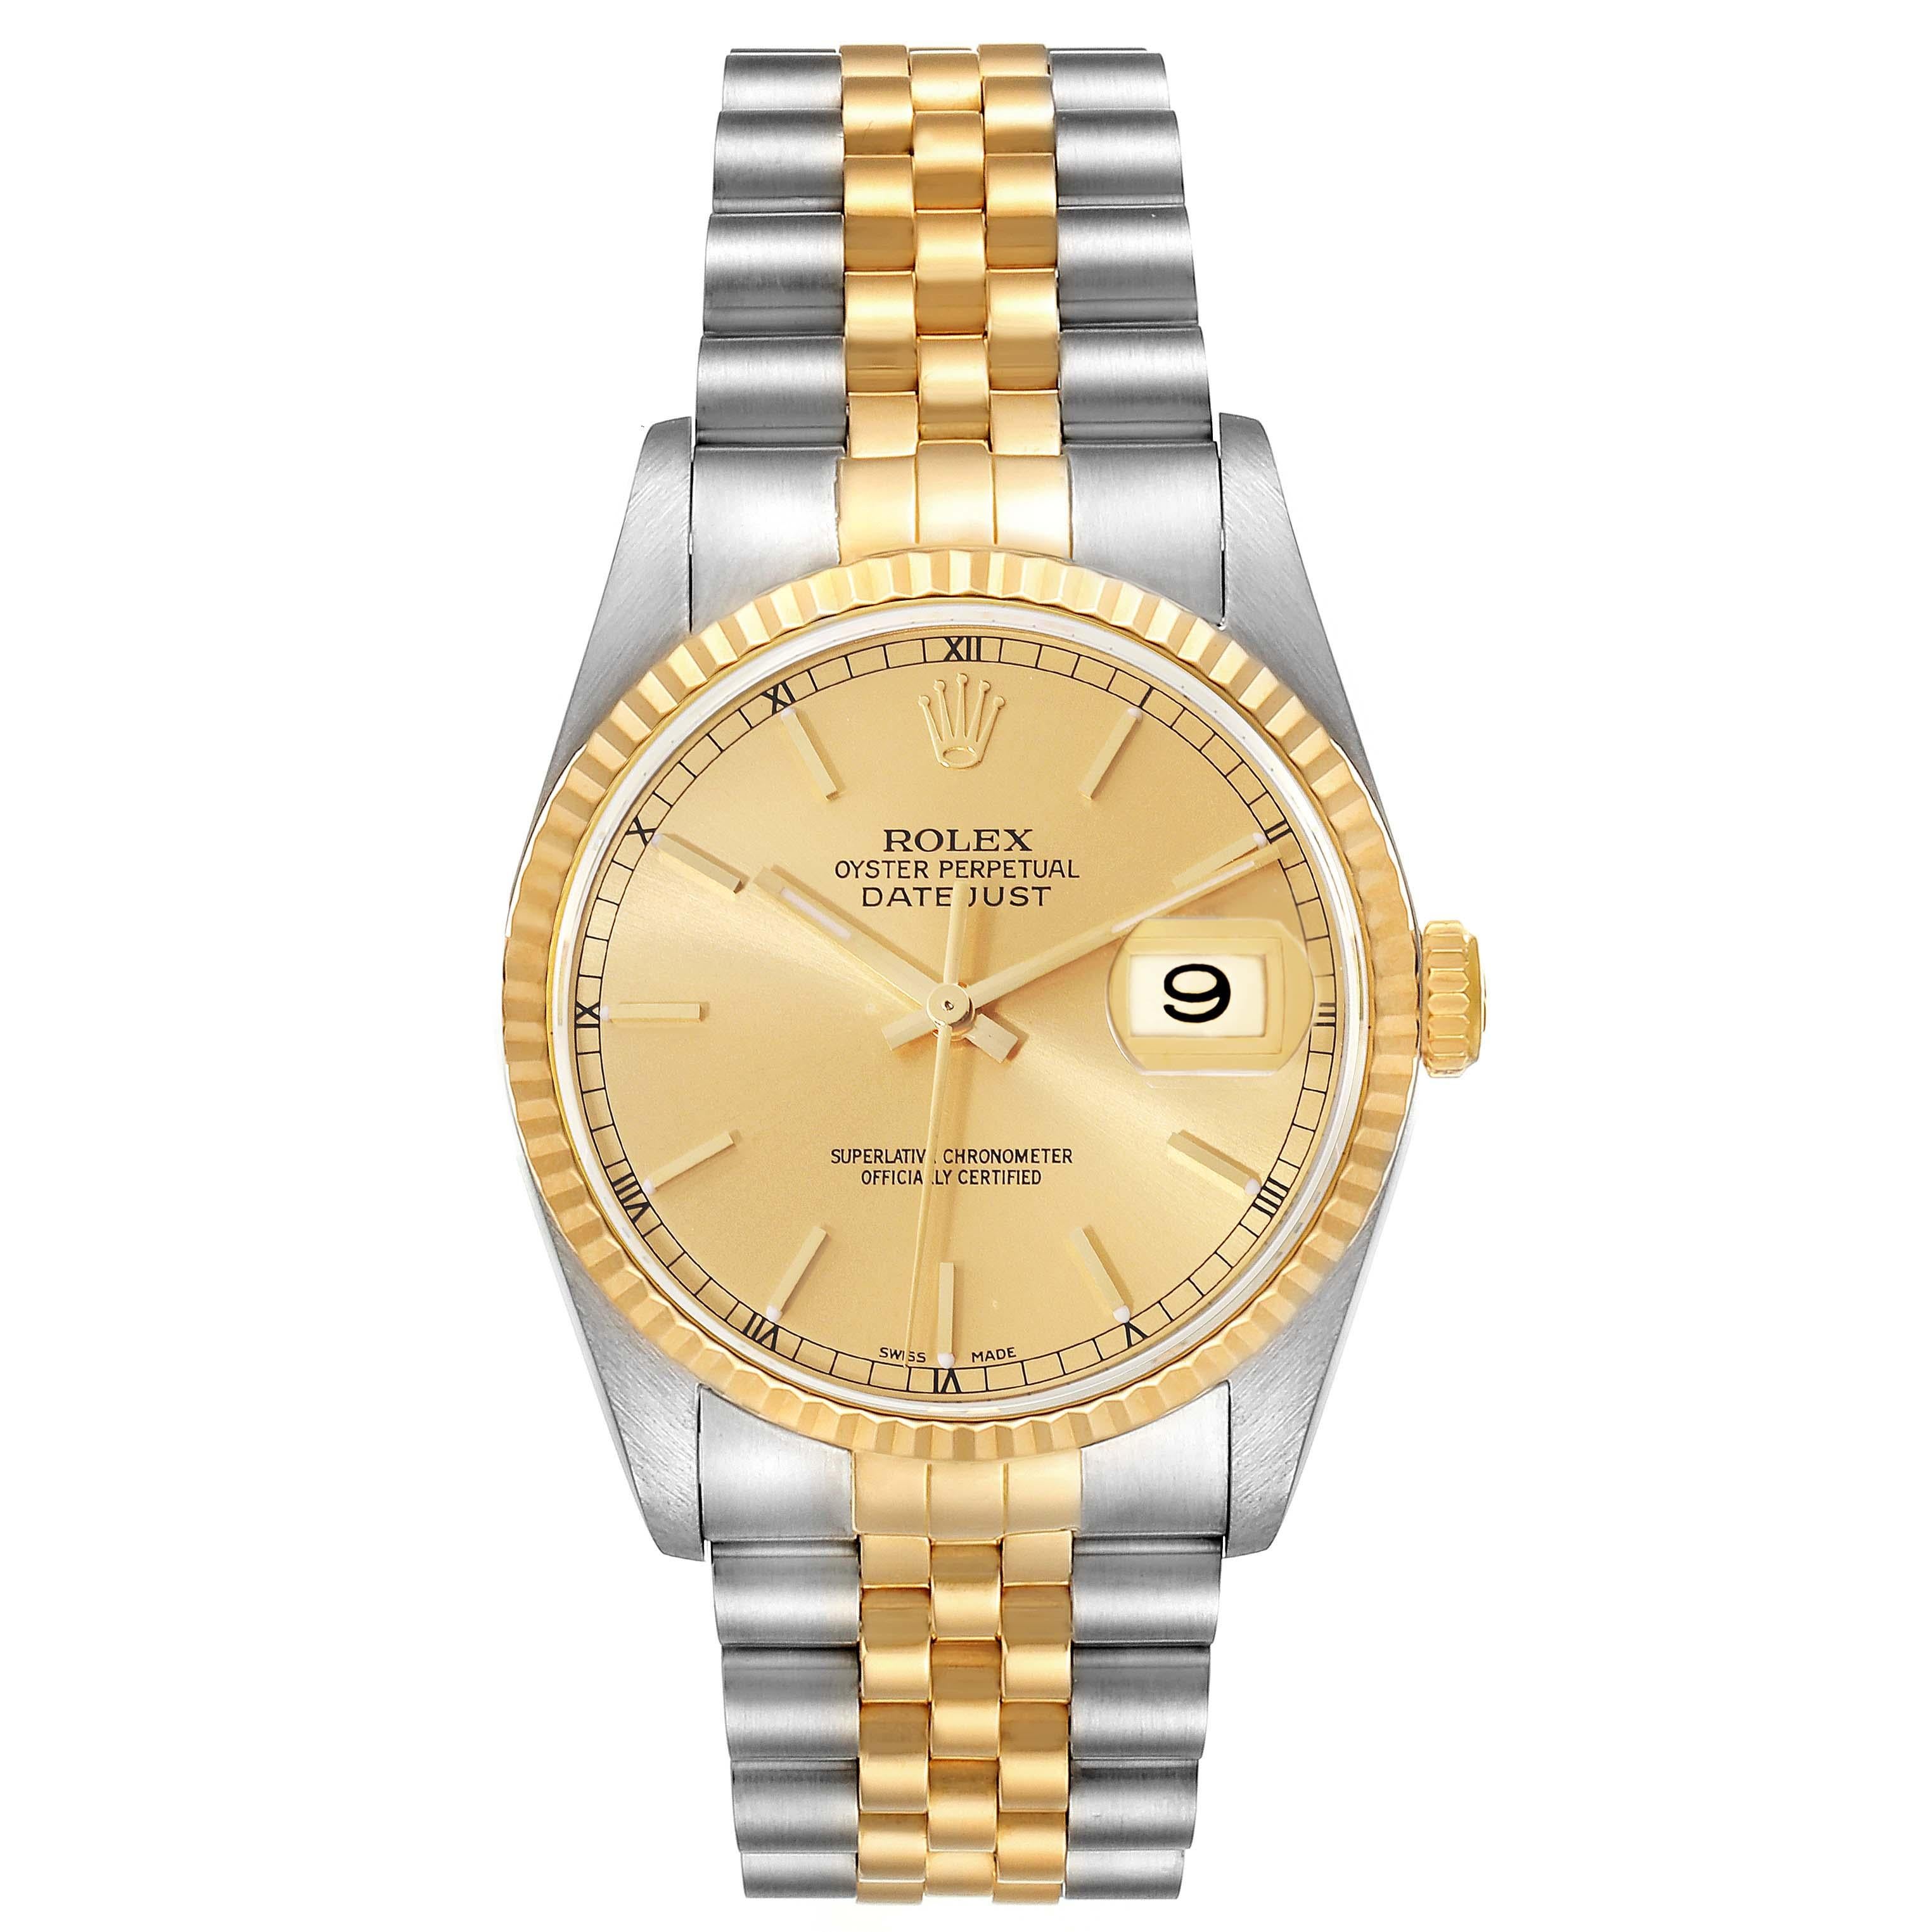 Rolex Datejust Champagne Dial Steel Yellow Gold Mens Watch 16233 Box Papers. Officially certified chronometer automatic self-winding movement. Stainless steel case 36 mm in diameter.  Rolex logo on an 18K yellow gold crown. 18k yellow gold fluted